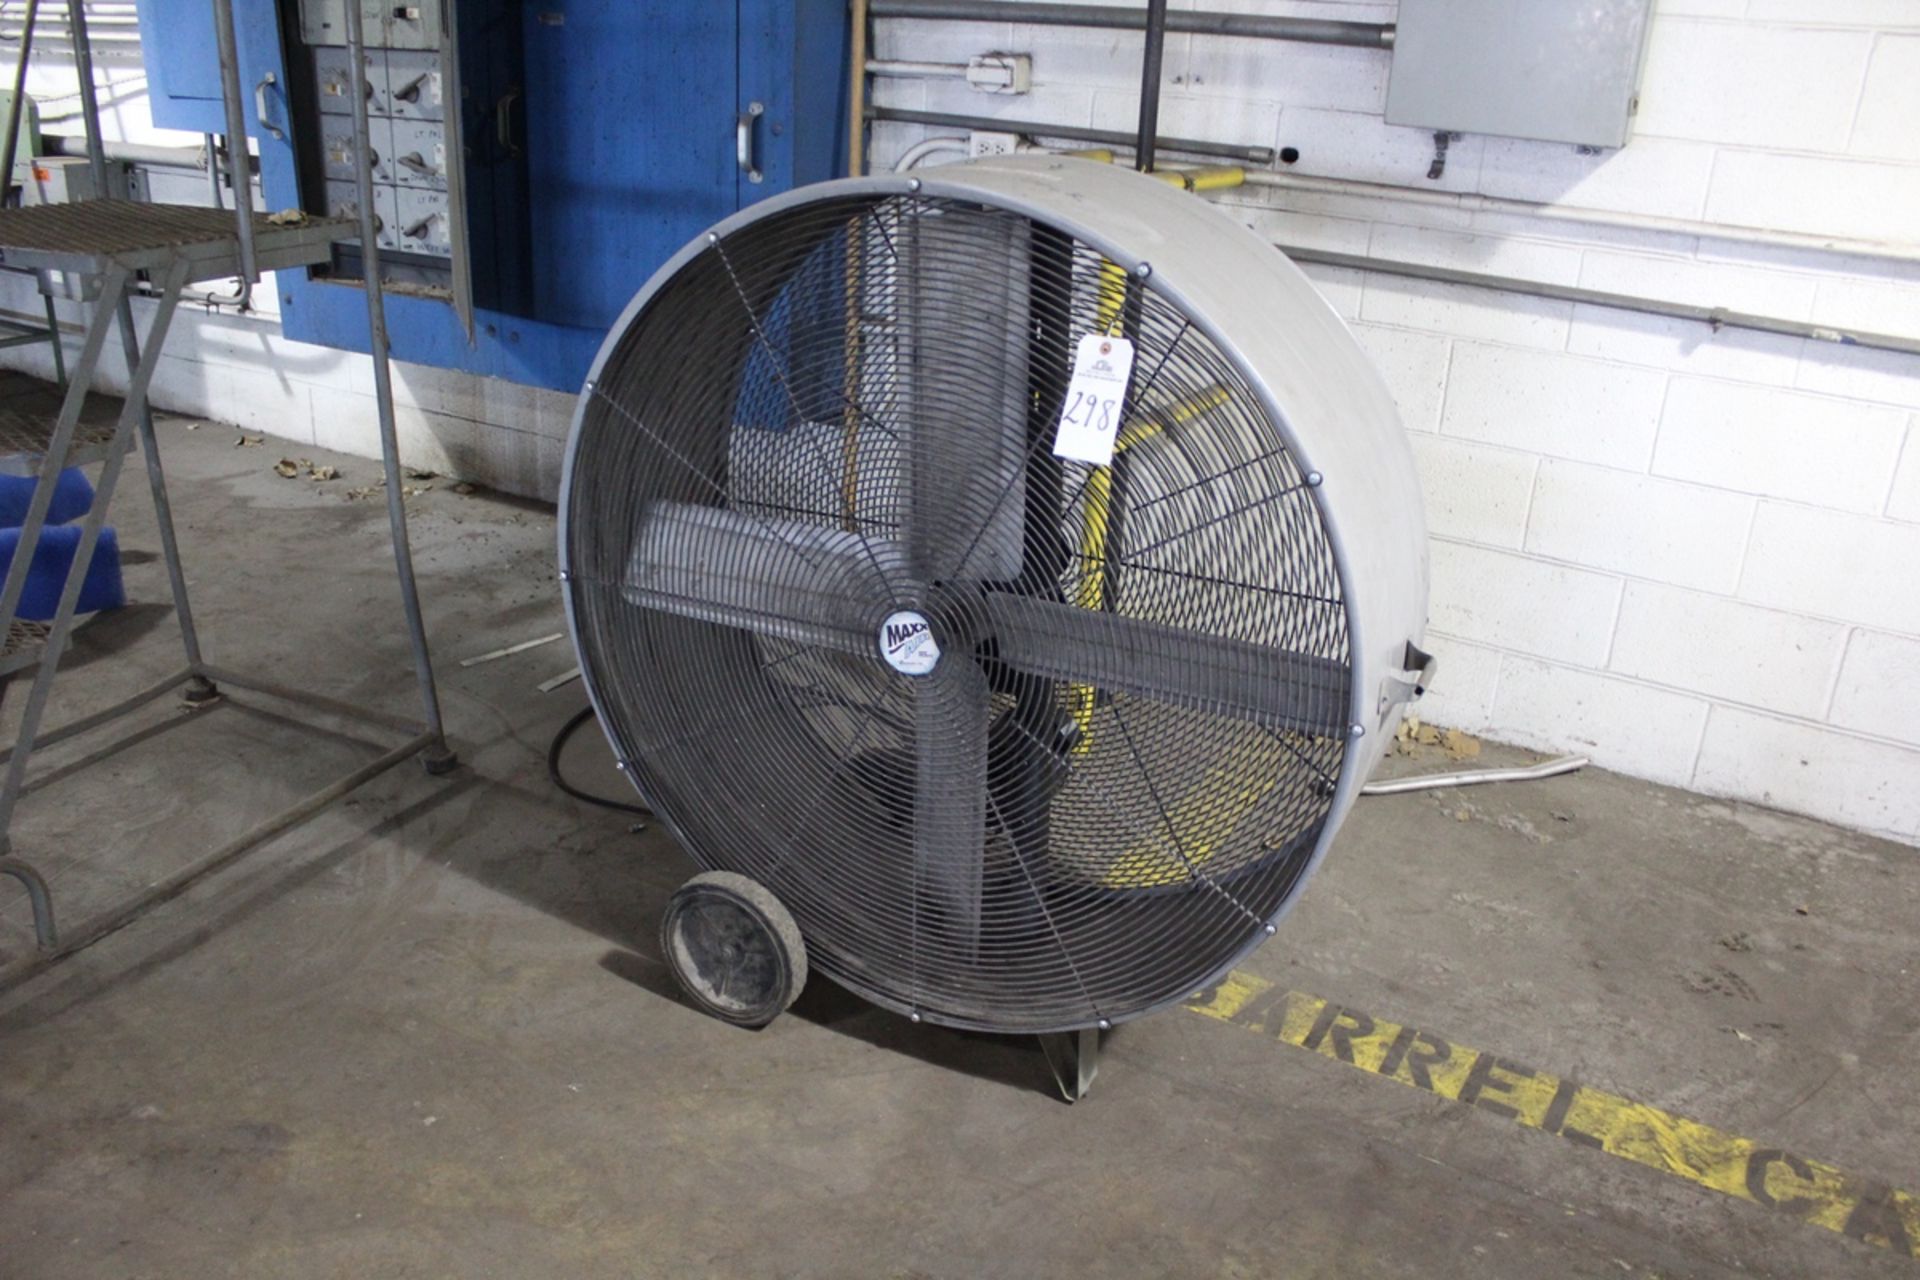 Shop Fan | Rig Fee: Hand Carry or Contact Rigger